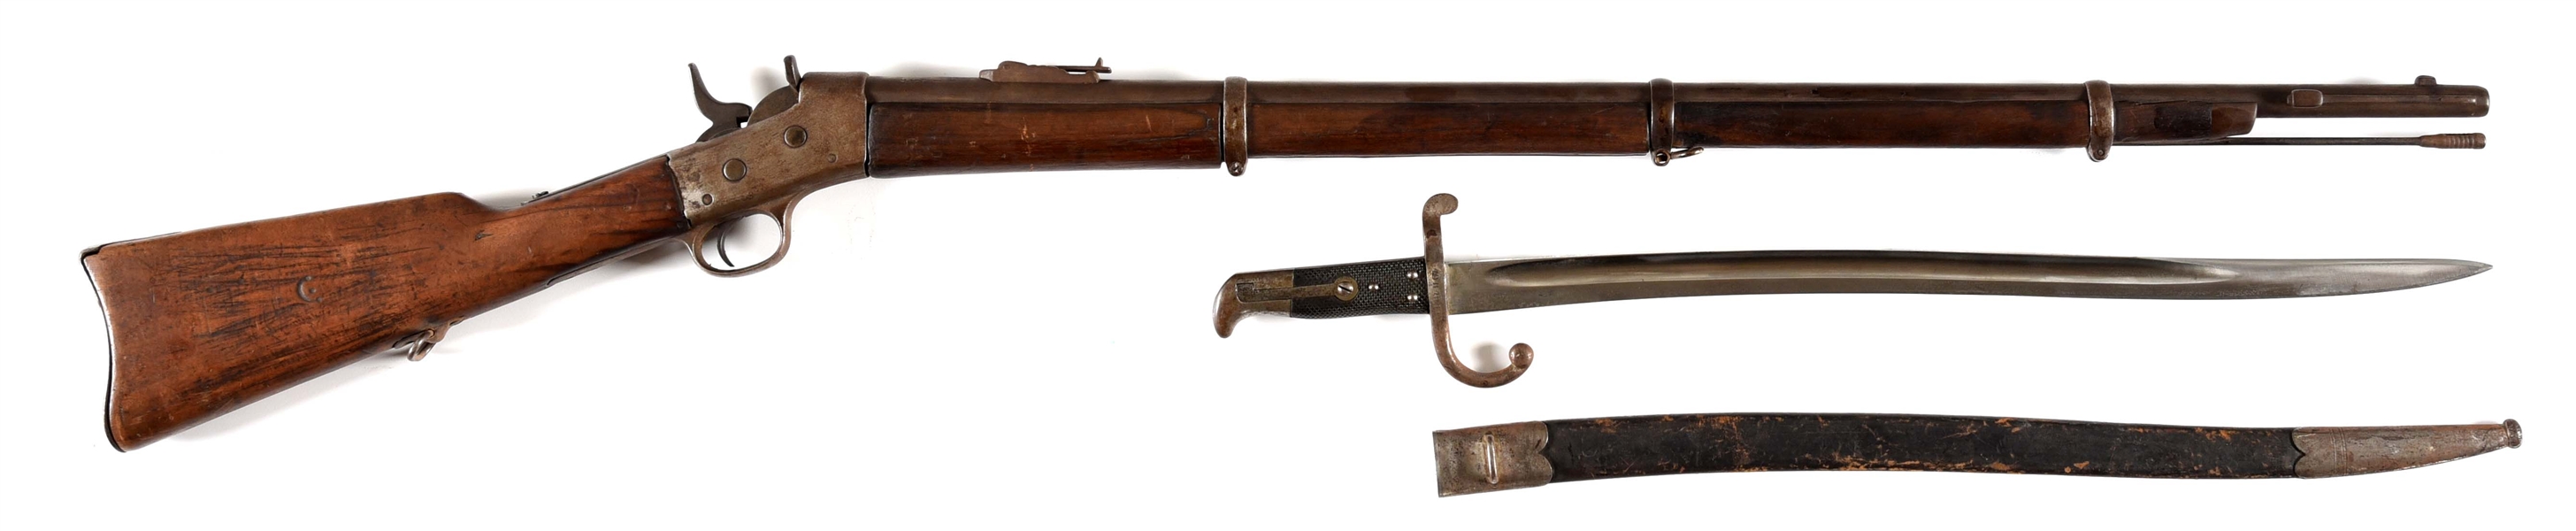 (A) REMINGTON ROLLING BLOCK RIFLE WITH BAYONET.